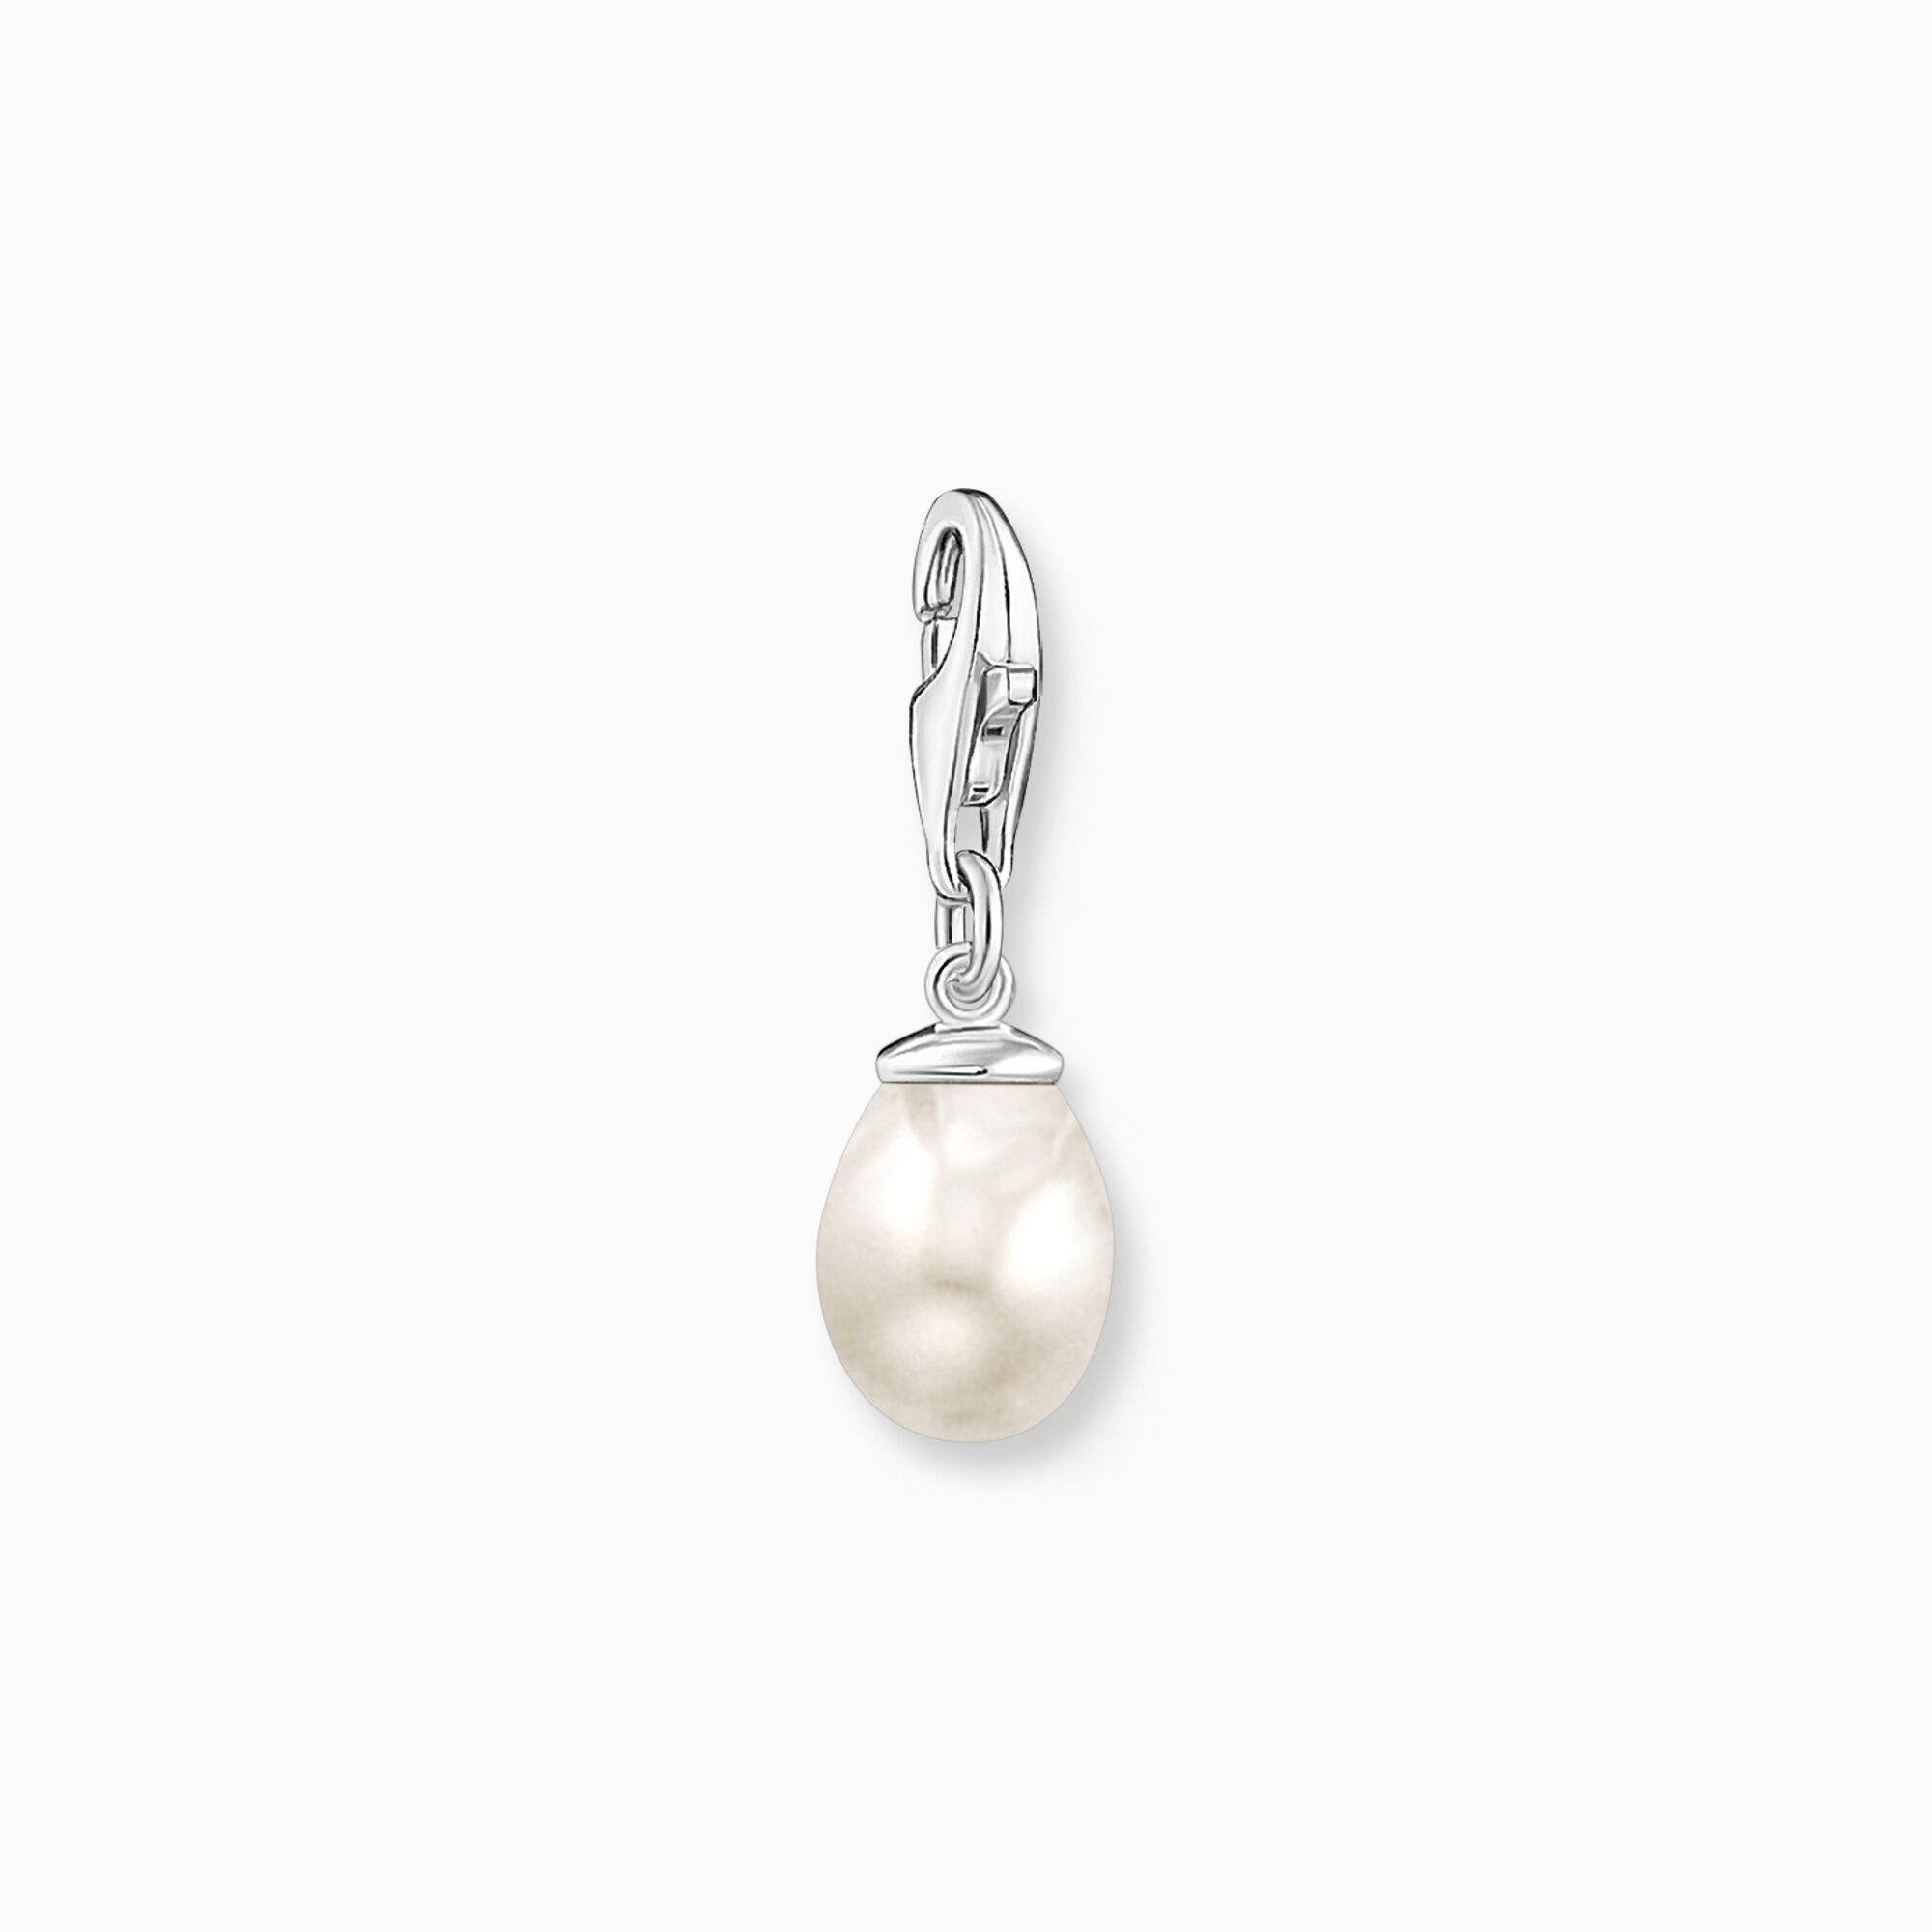 Charm pendant white pearl silver from the Charm Club collection in the THOMAS SABO online store